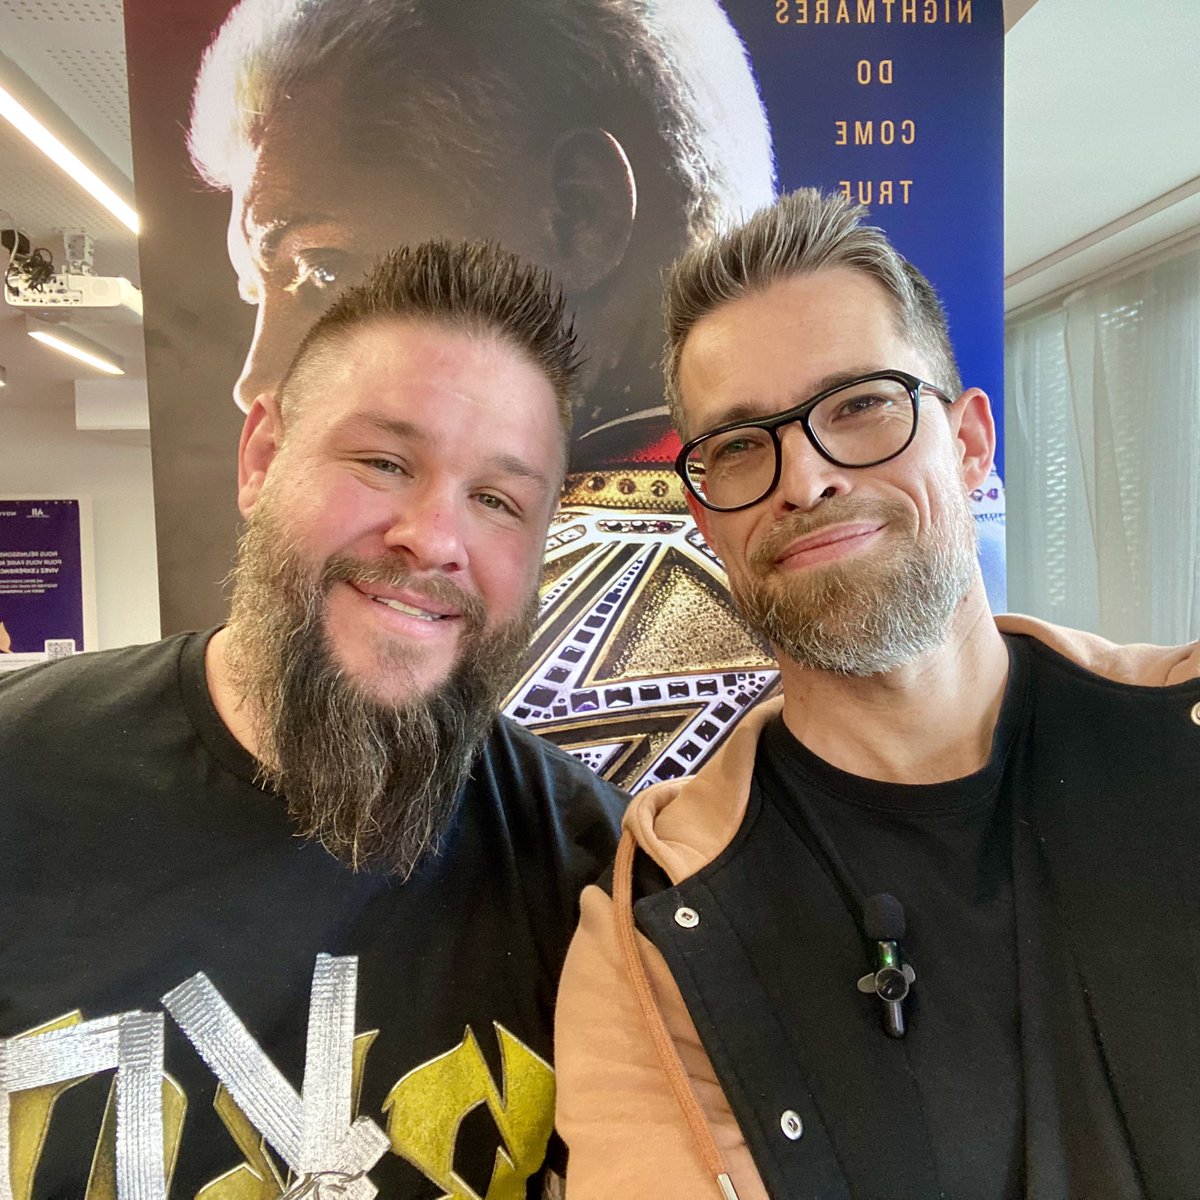 Thank you @FightOwensFight for your kindness and professionalism during our interview. Merci 🙏